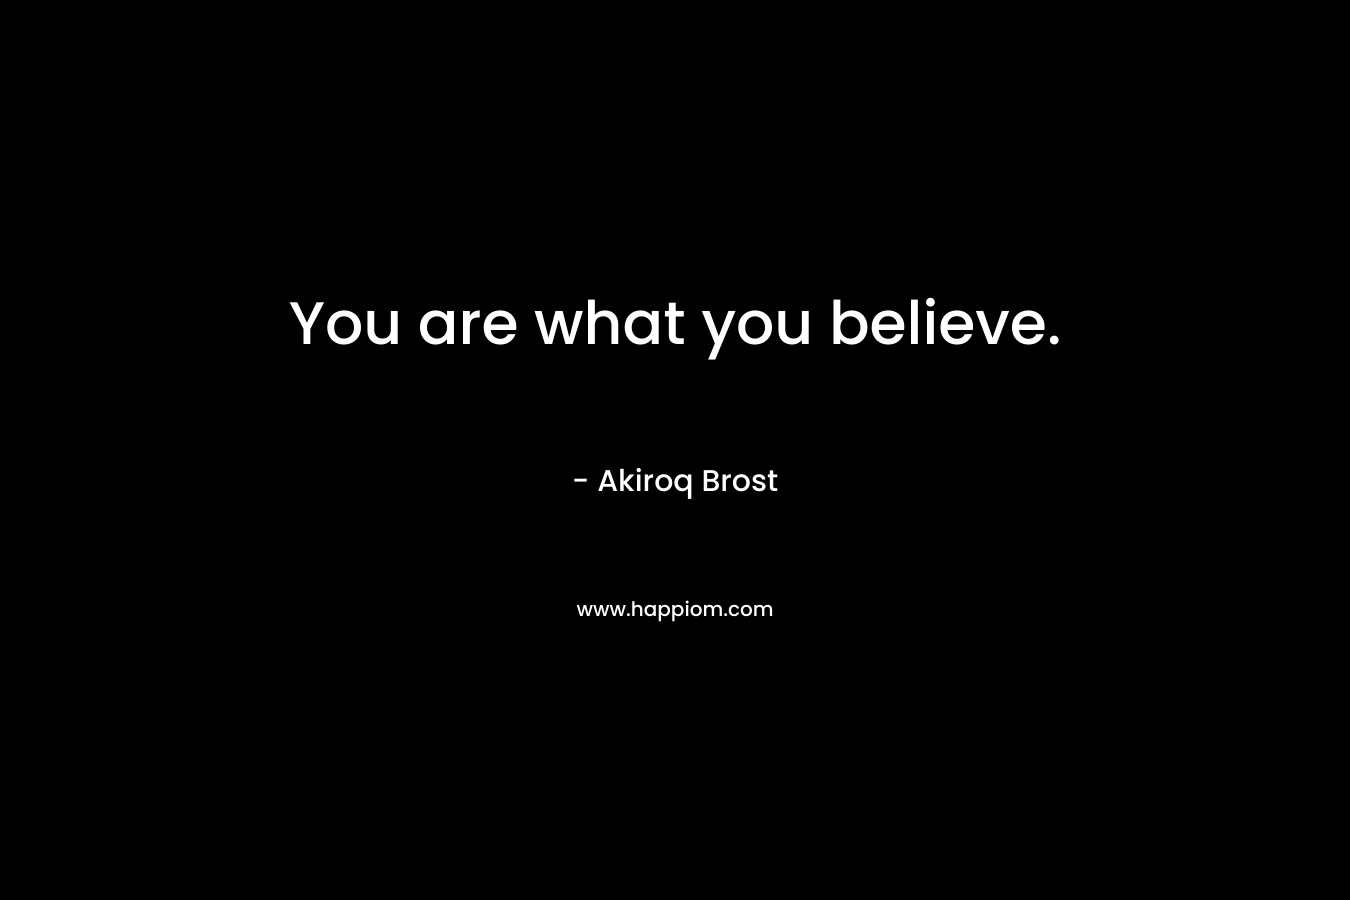 You are what you believe.